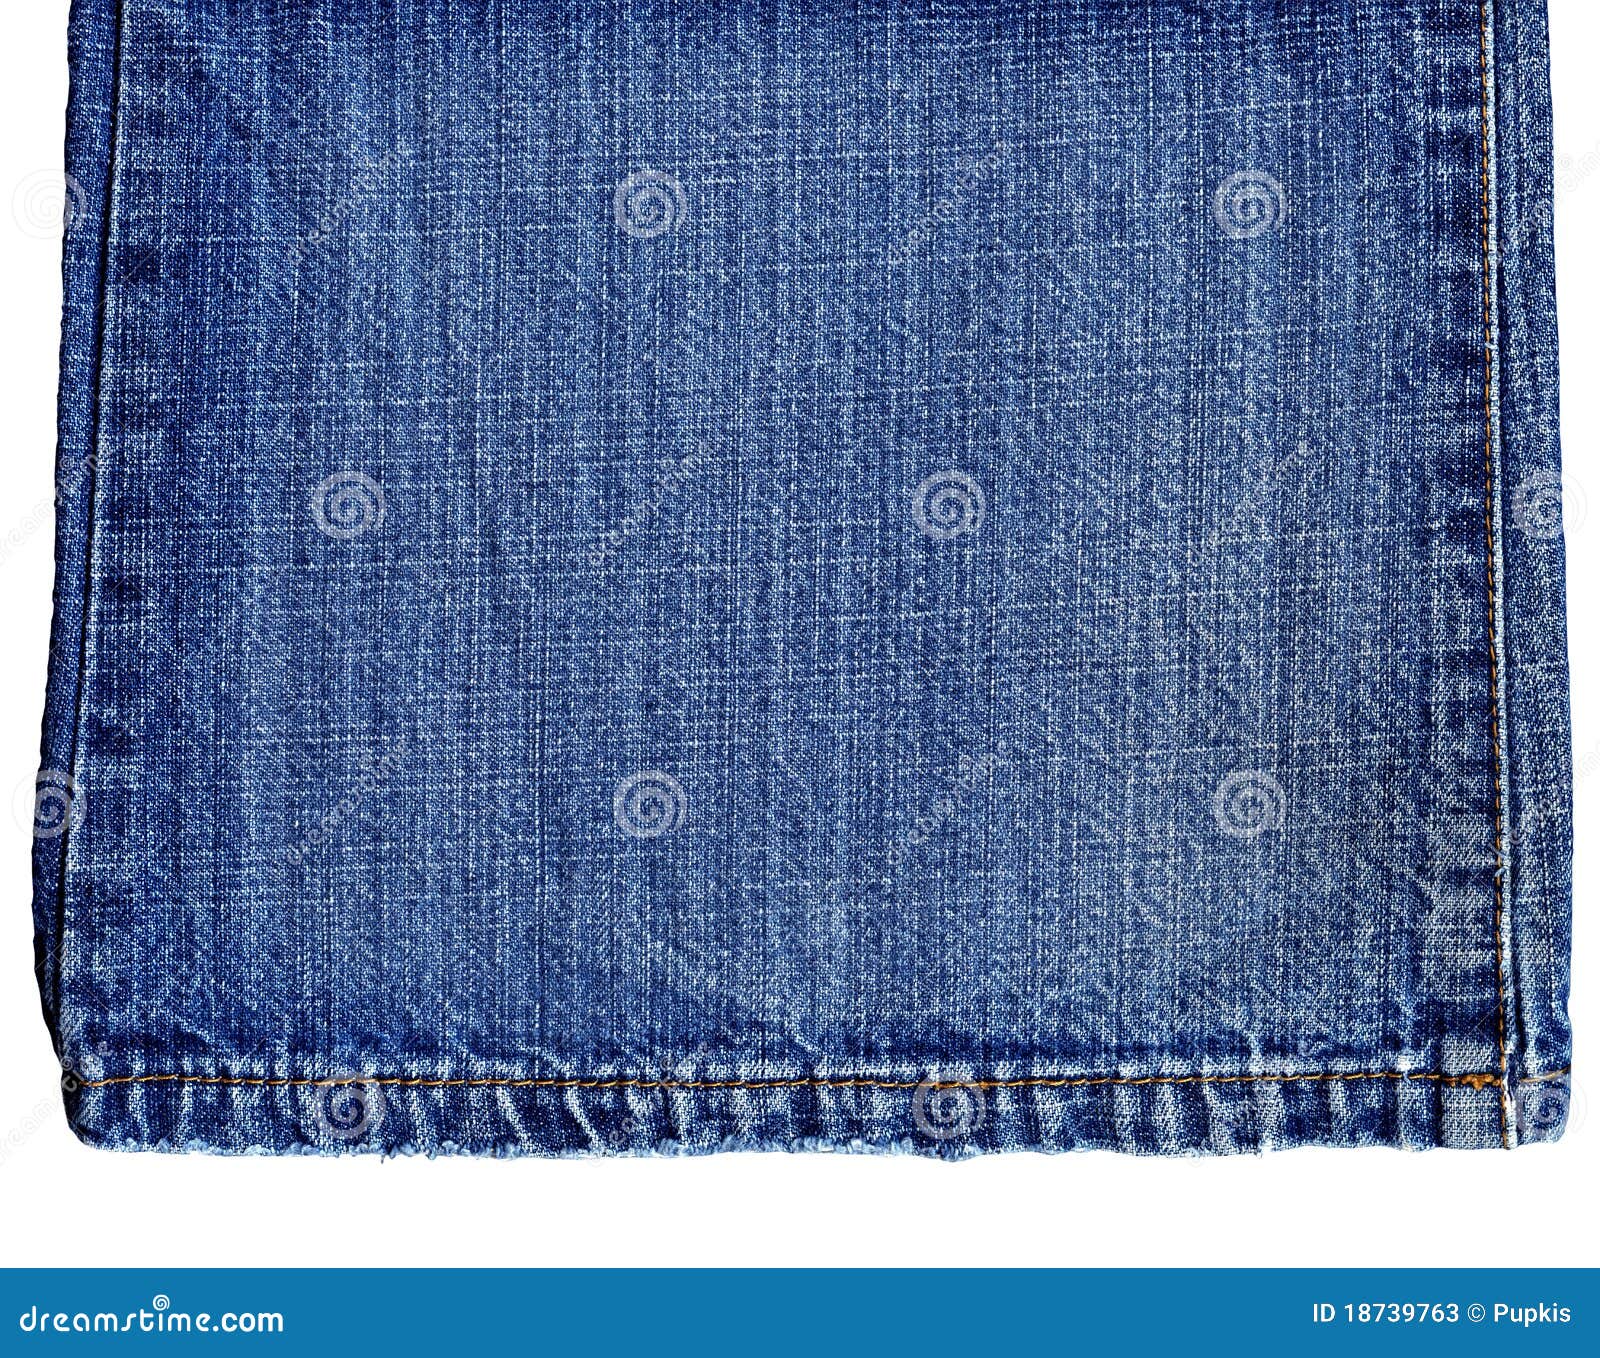 Jeans texture stock image. Image of design, back, apparel - 18739763